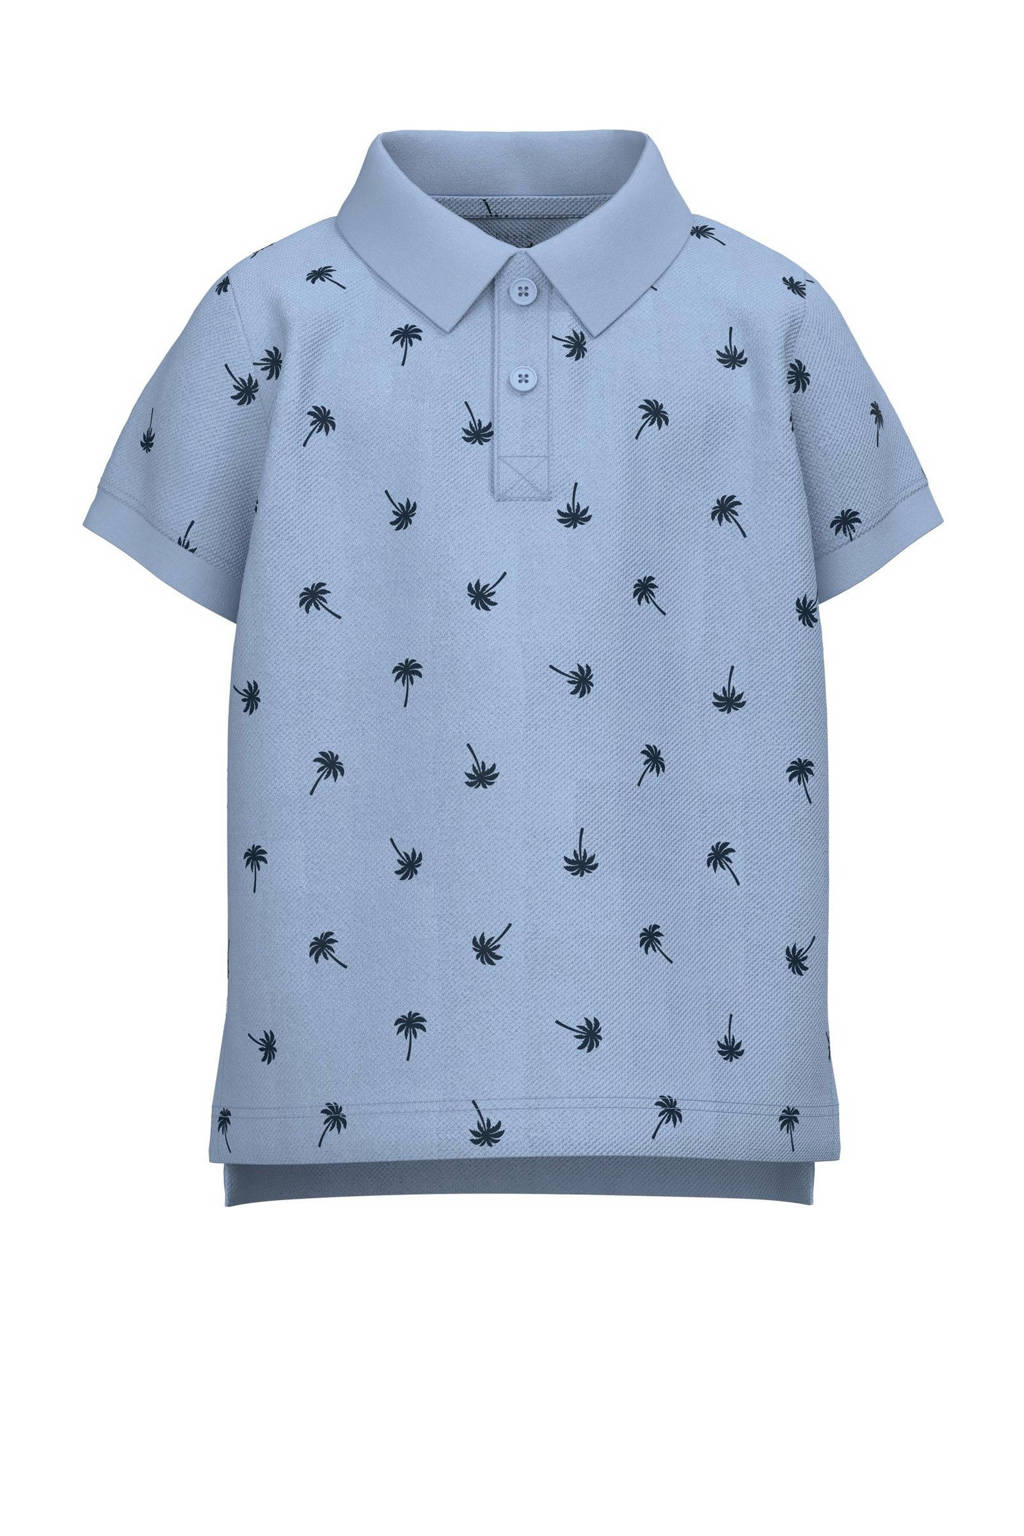 polo NMMVOLO met all over print lichtblauw/donkerblauw